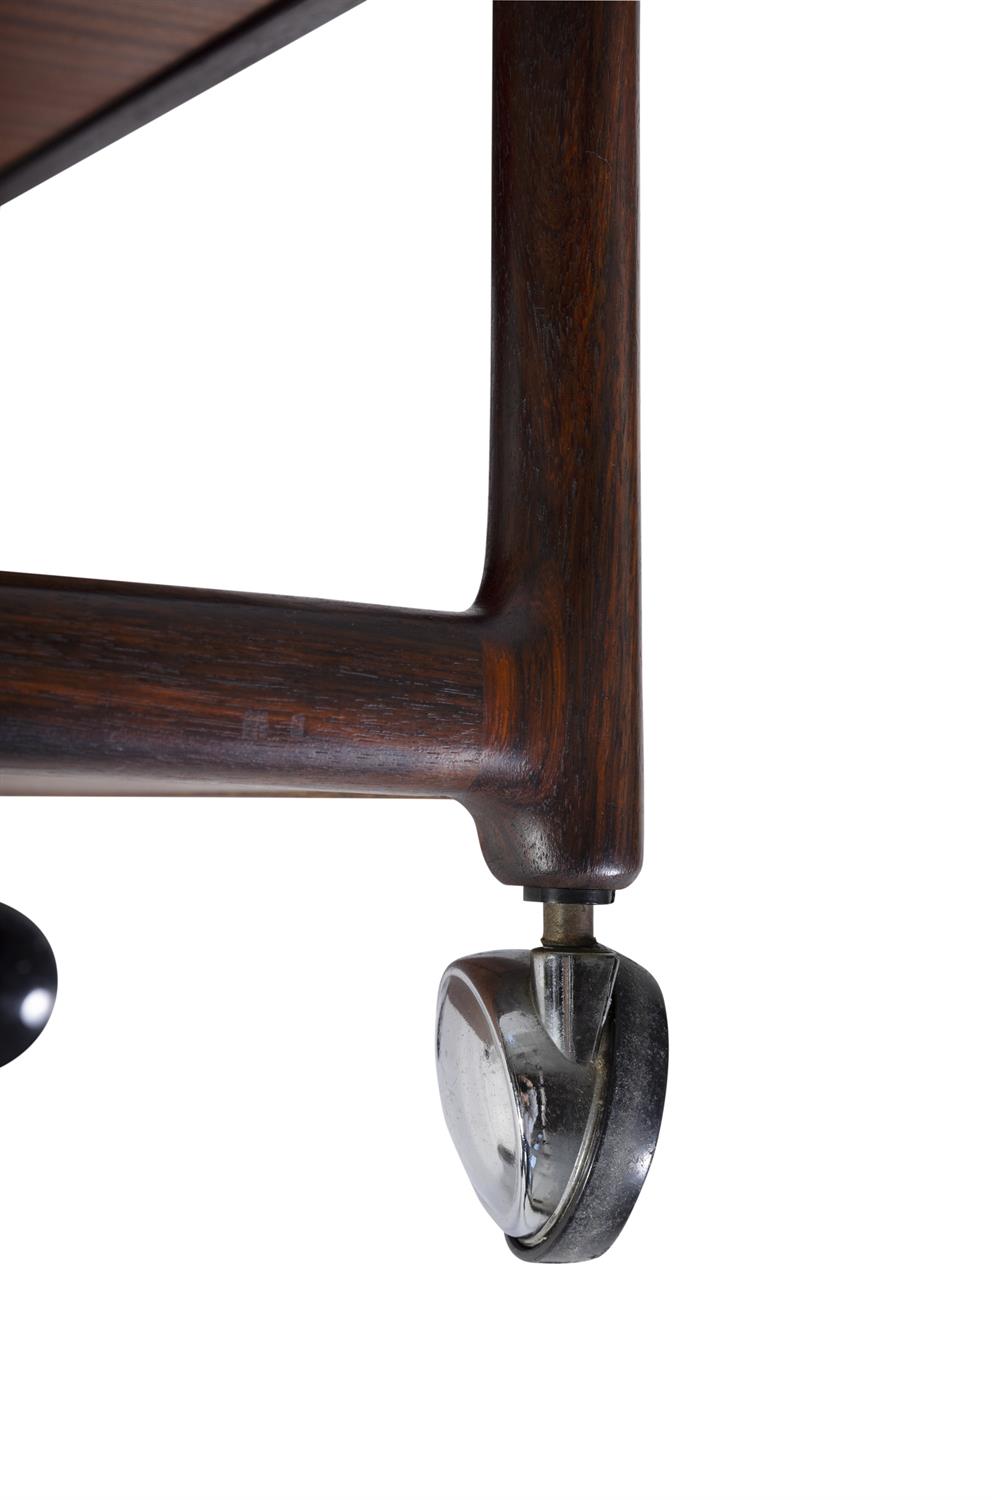 JOHANNES ANDERSEN A rosewood drinks trolley on four castors by Johannes Andersen for CFC - Image 5 of 5